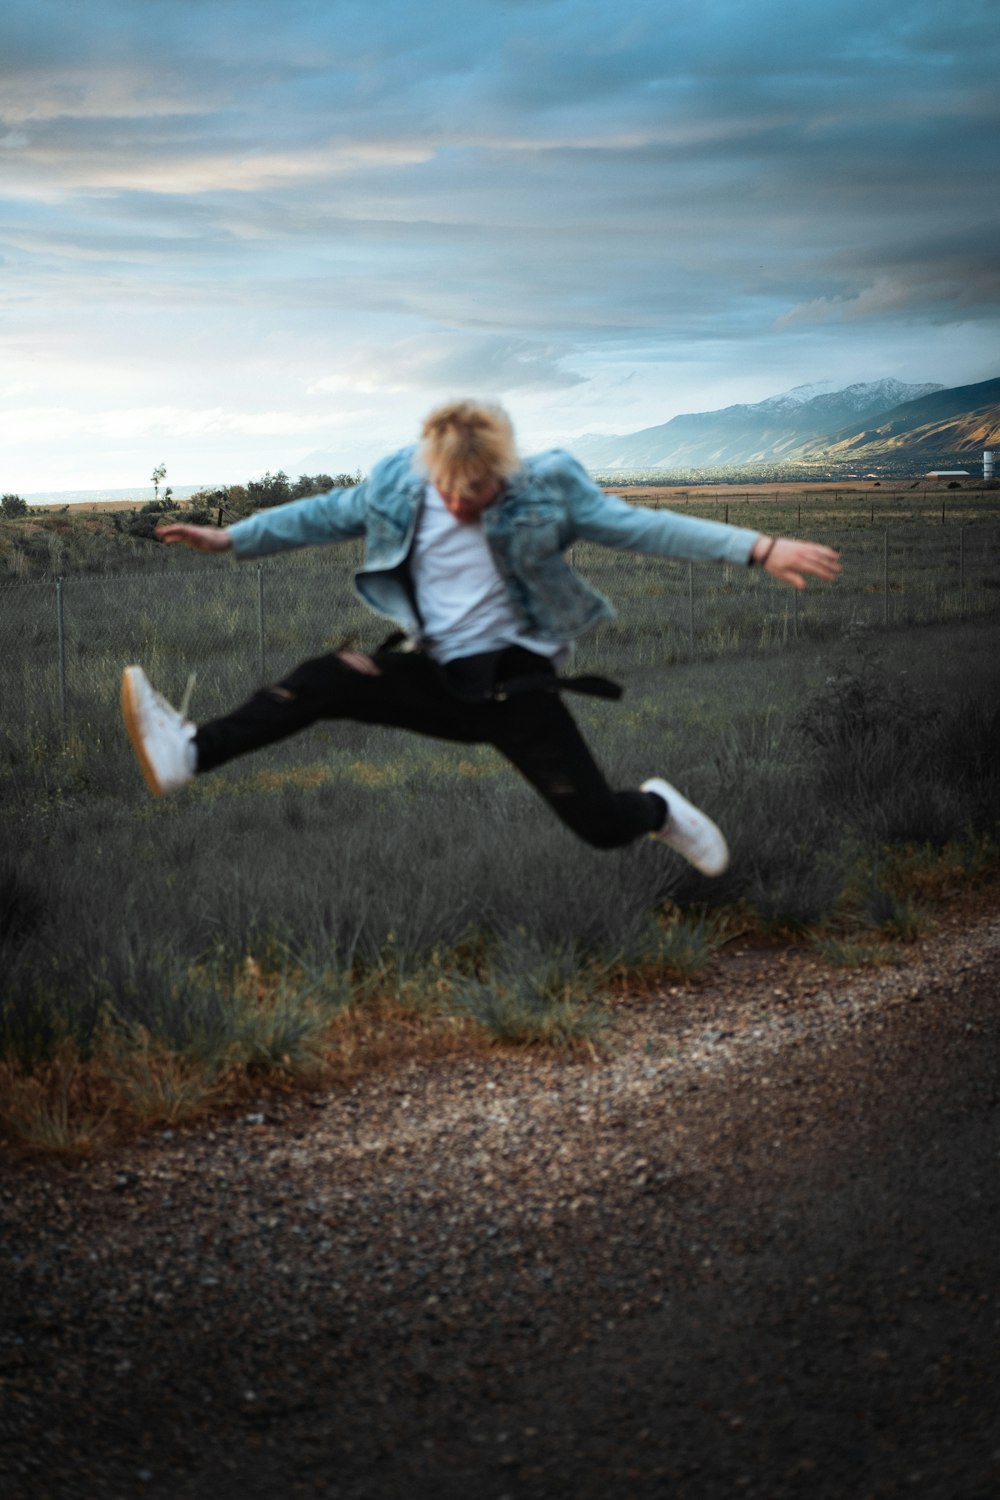 a person jumping in the air on a dirt road